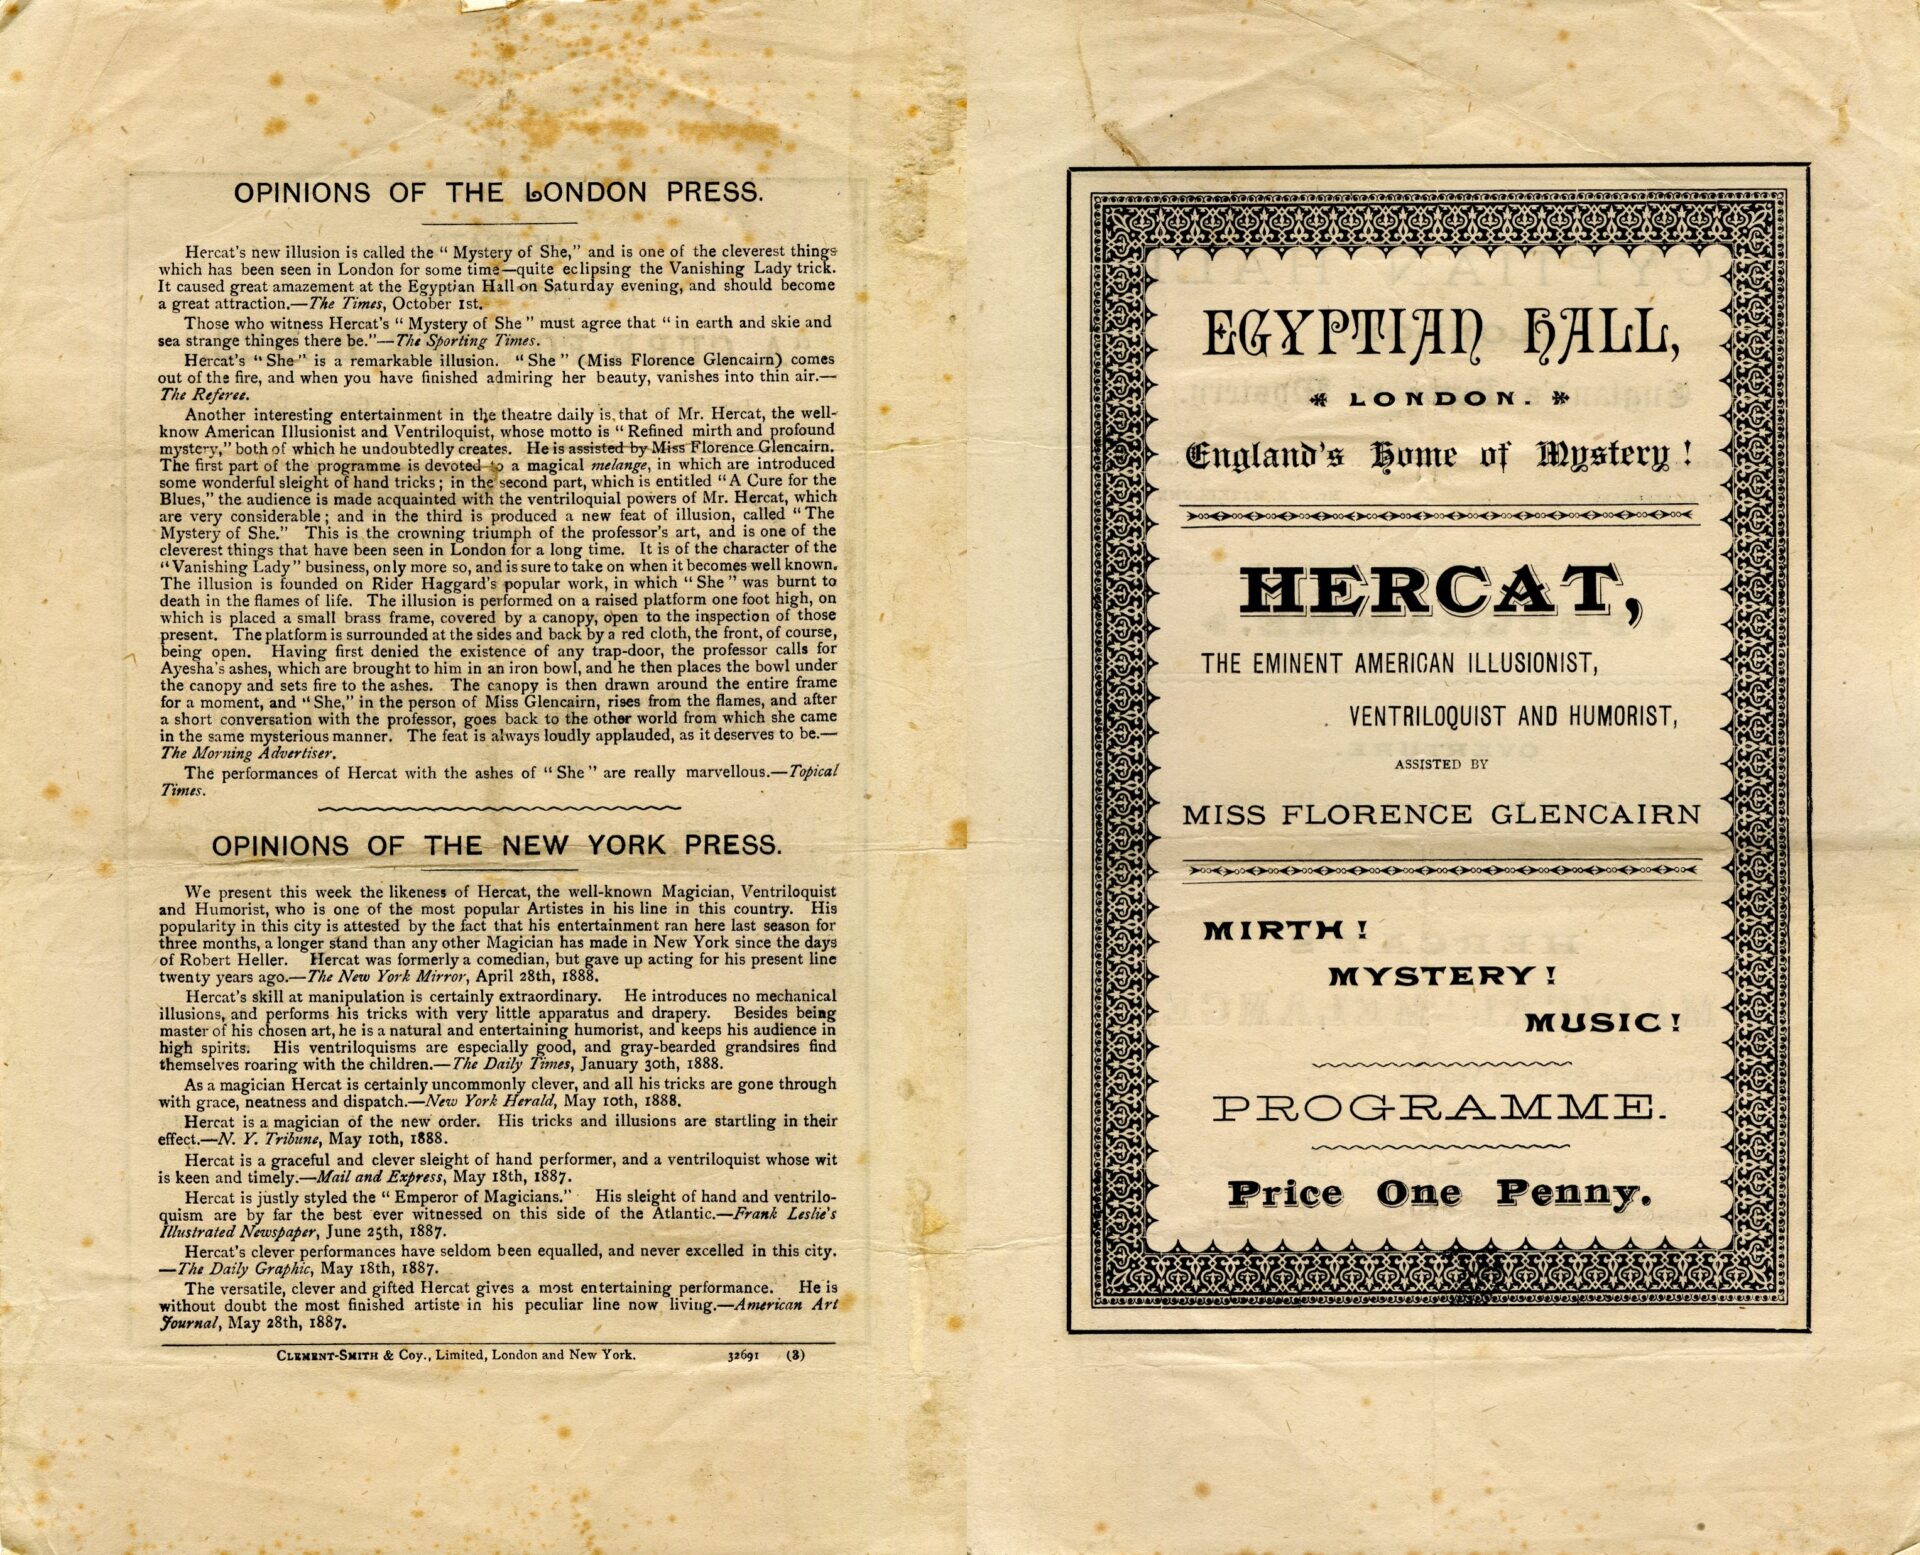 Programme for Hercat at the Egyptian Hall, 1888